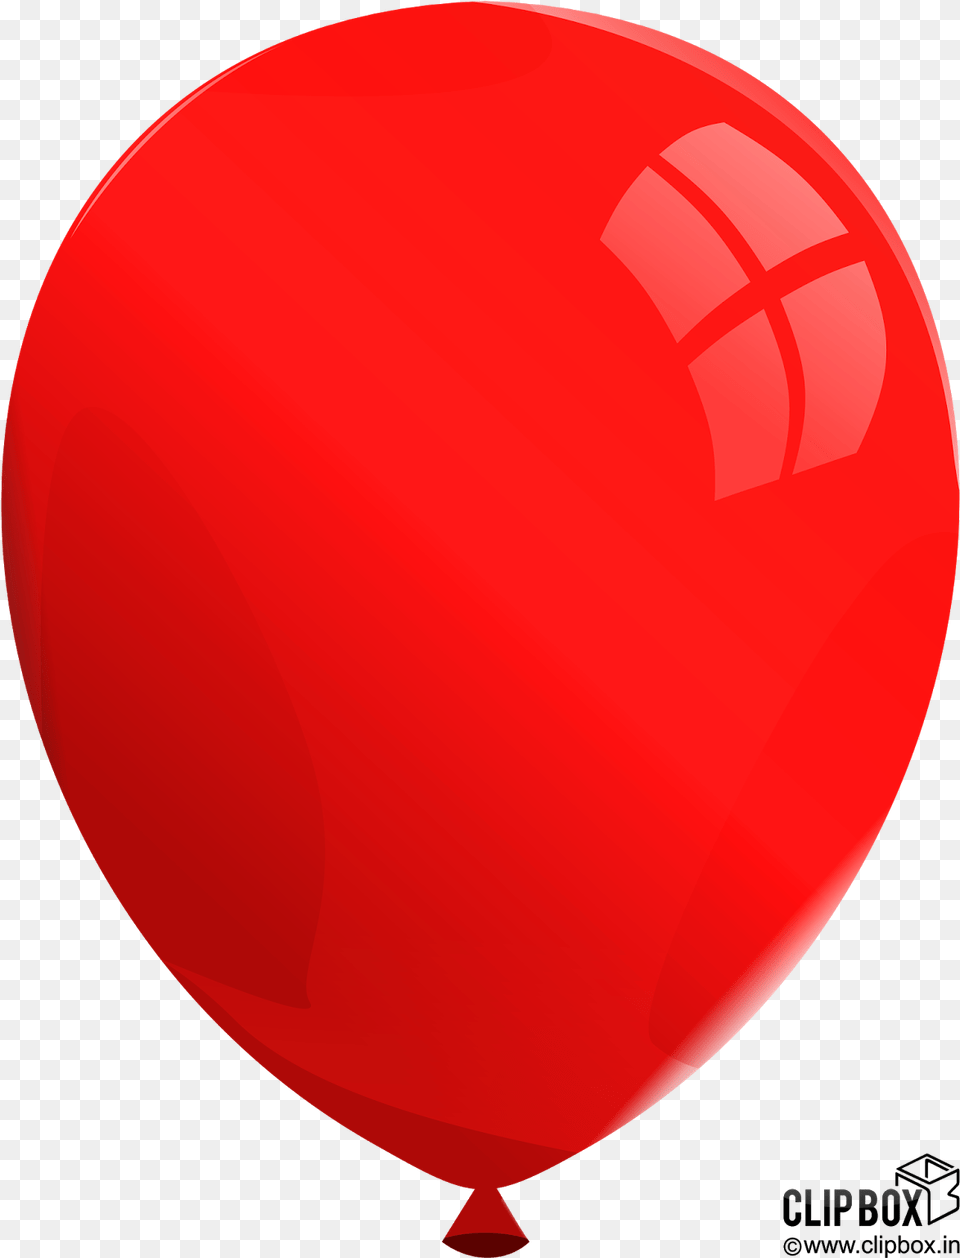 Clipbox Balloon Free Png Download